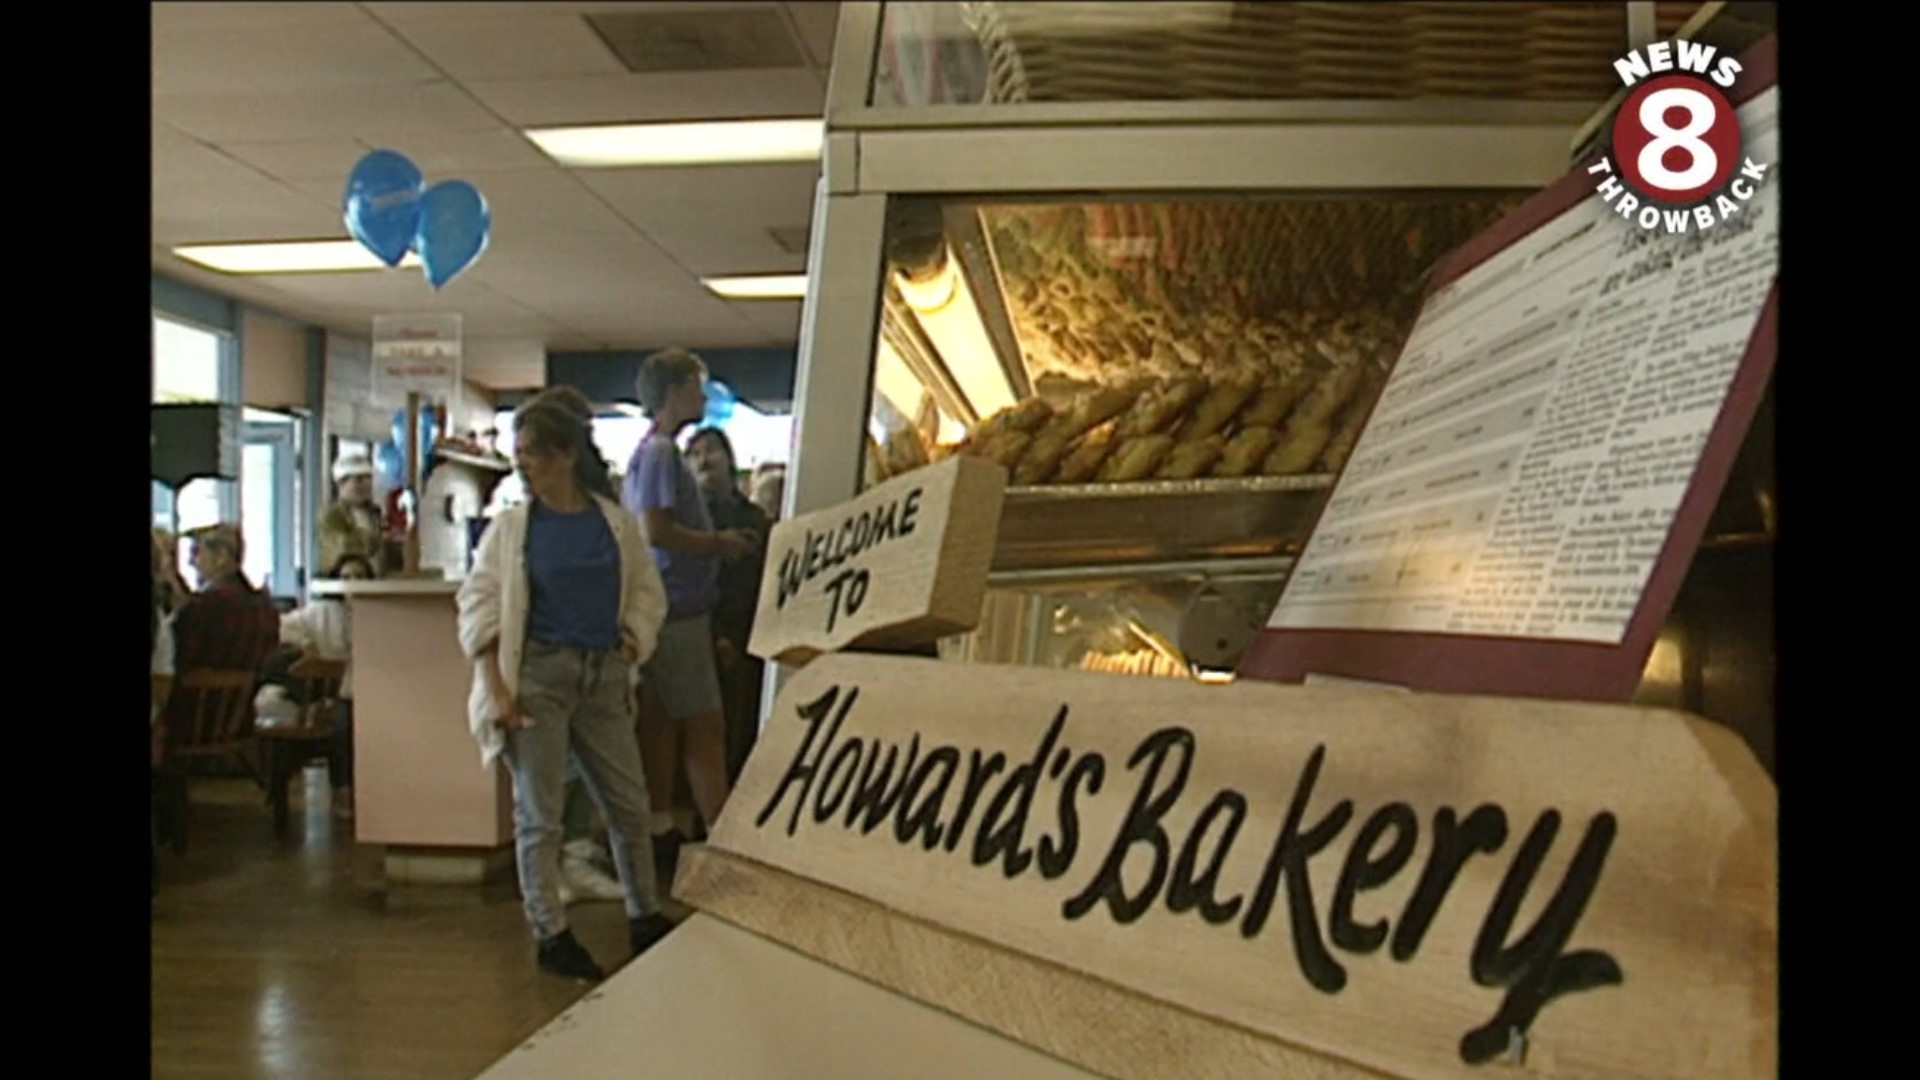 2011: For more than 40 years, this old school bakery on Broadway in El Cajon has been whippin', dippin', frosting and sprinklin' its authentic holiday favorites.